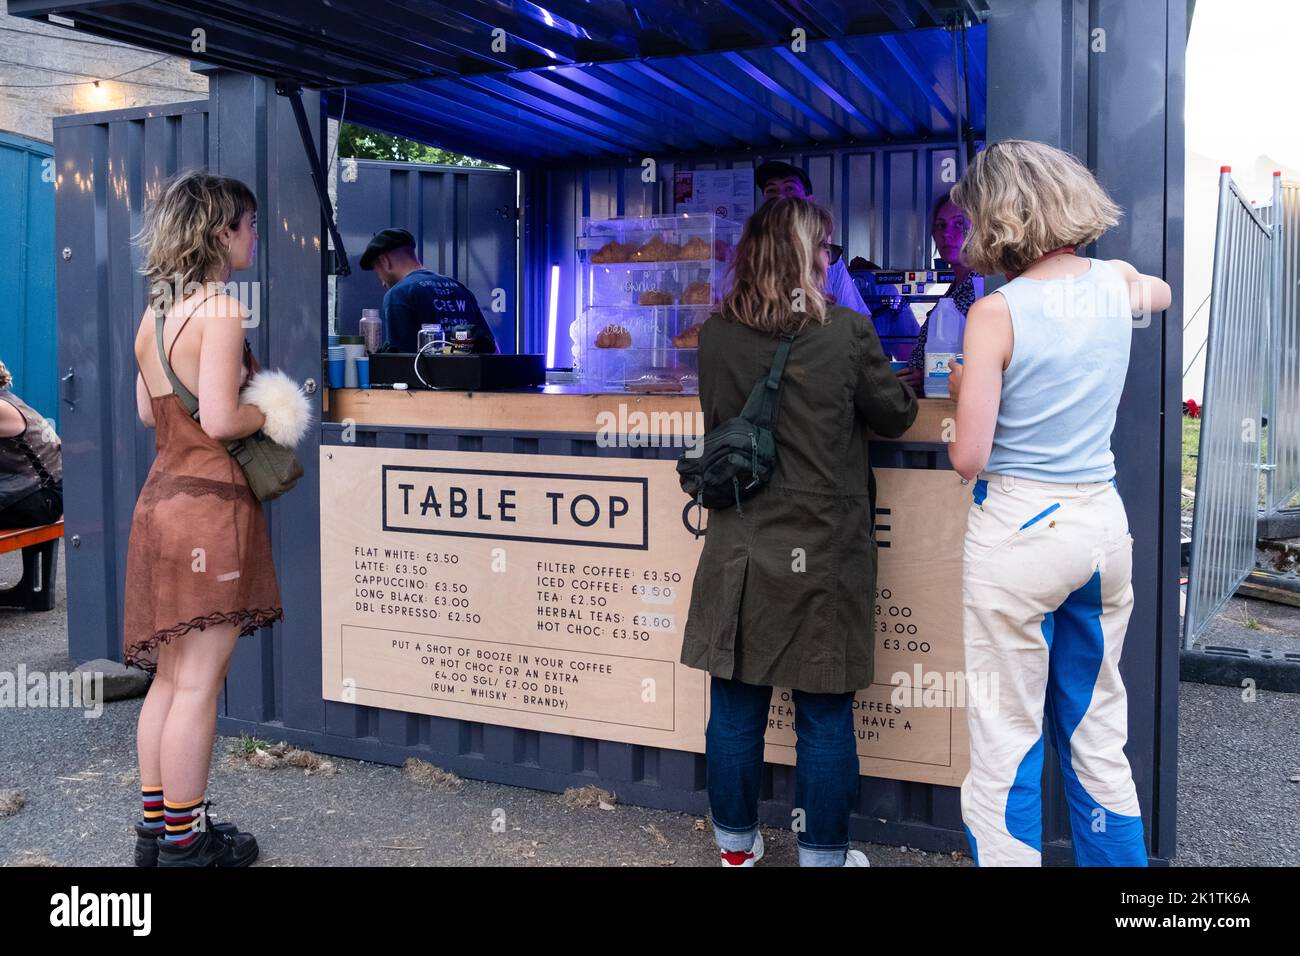 Fast food for the festival crowd at the Green Man 2022 music festival in Wales, UK, August 2022. Photograph: Rob Watkins/Alamy Stock Photo